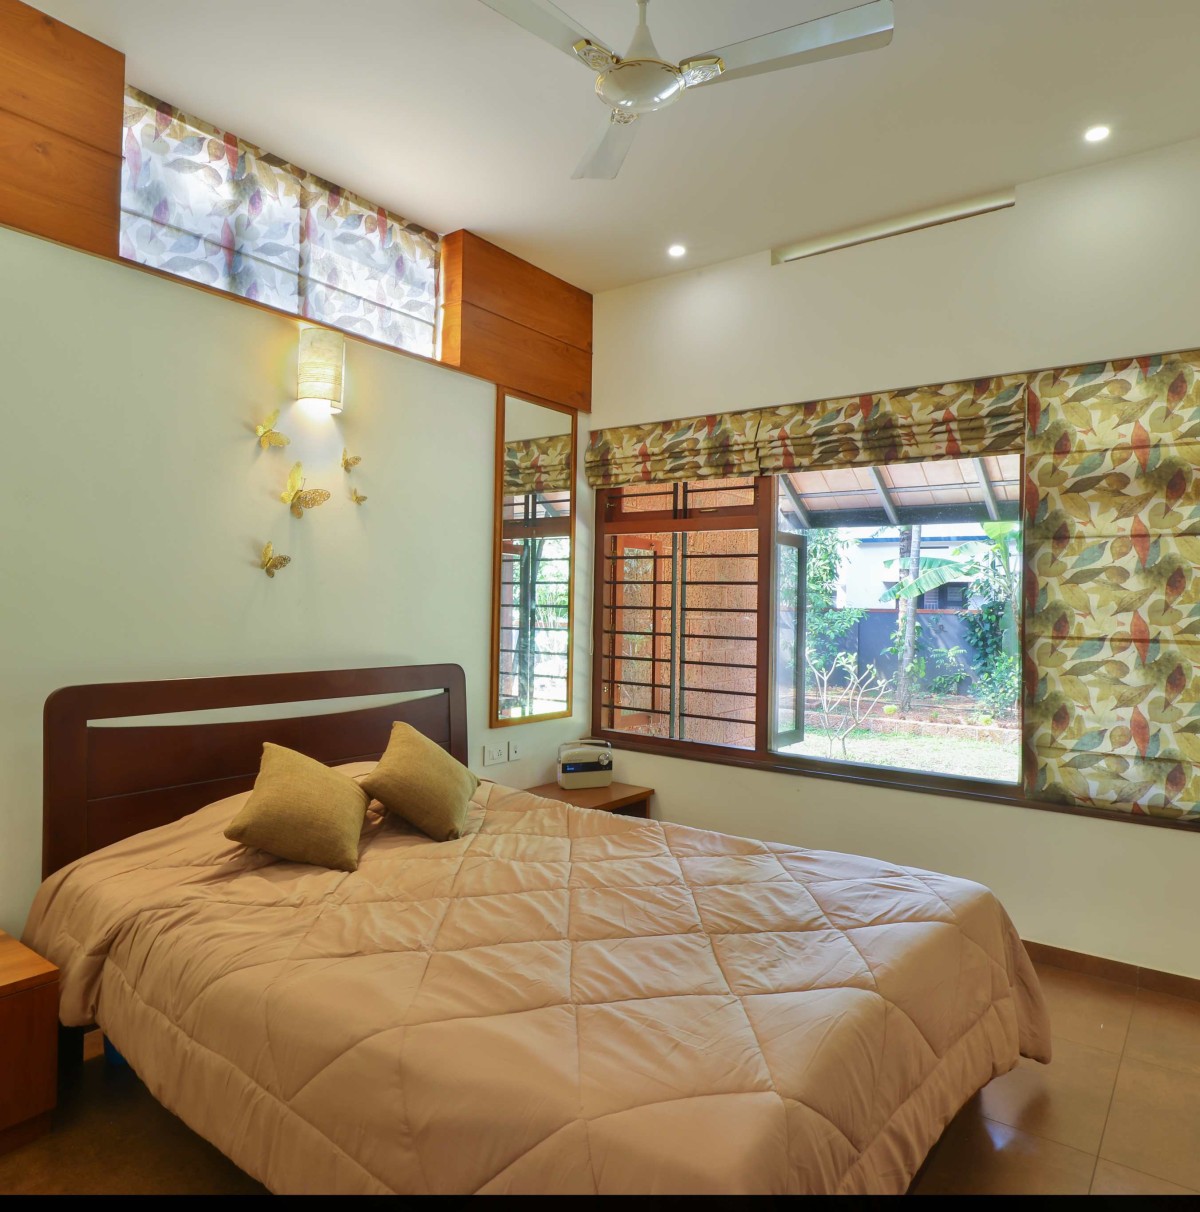 Bedroom 3 of Our Space by Satkriya Architecture